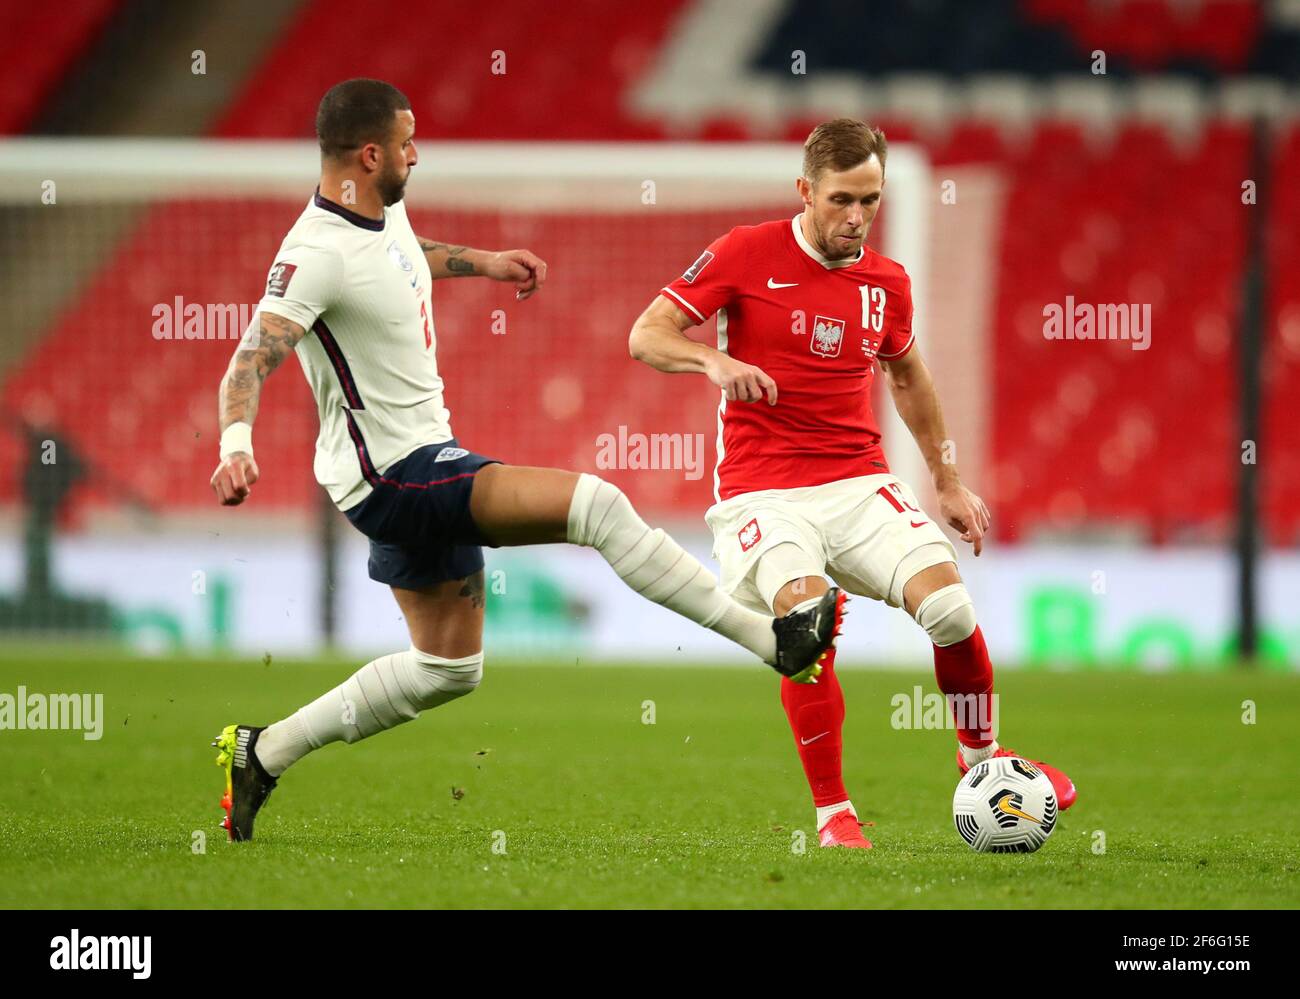 England's Kyle Walker (left) and Poland's Maciej Rybus battle for the ball during the 2022 FIFA World Cup Qualifying match at Wembley Stadium, London. Picture date: Wednesday March 31, 2021. Stock Photo